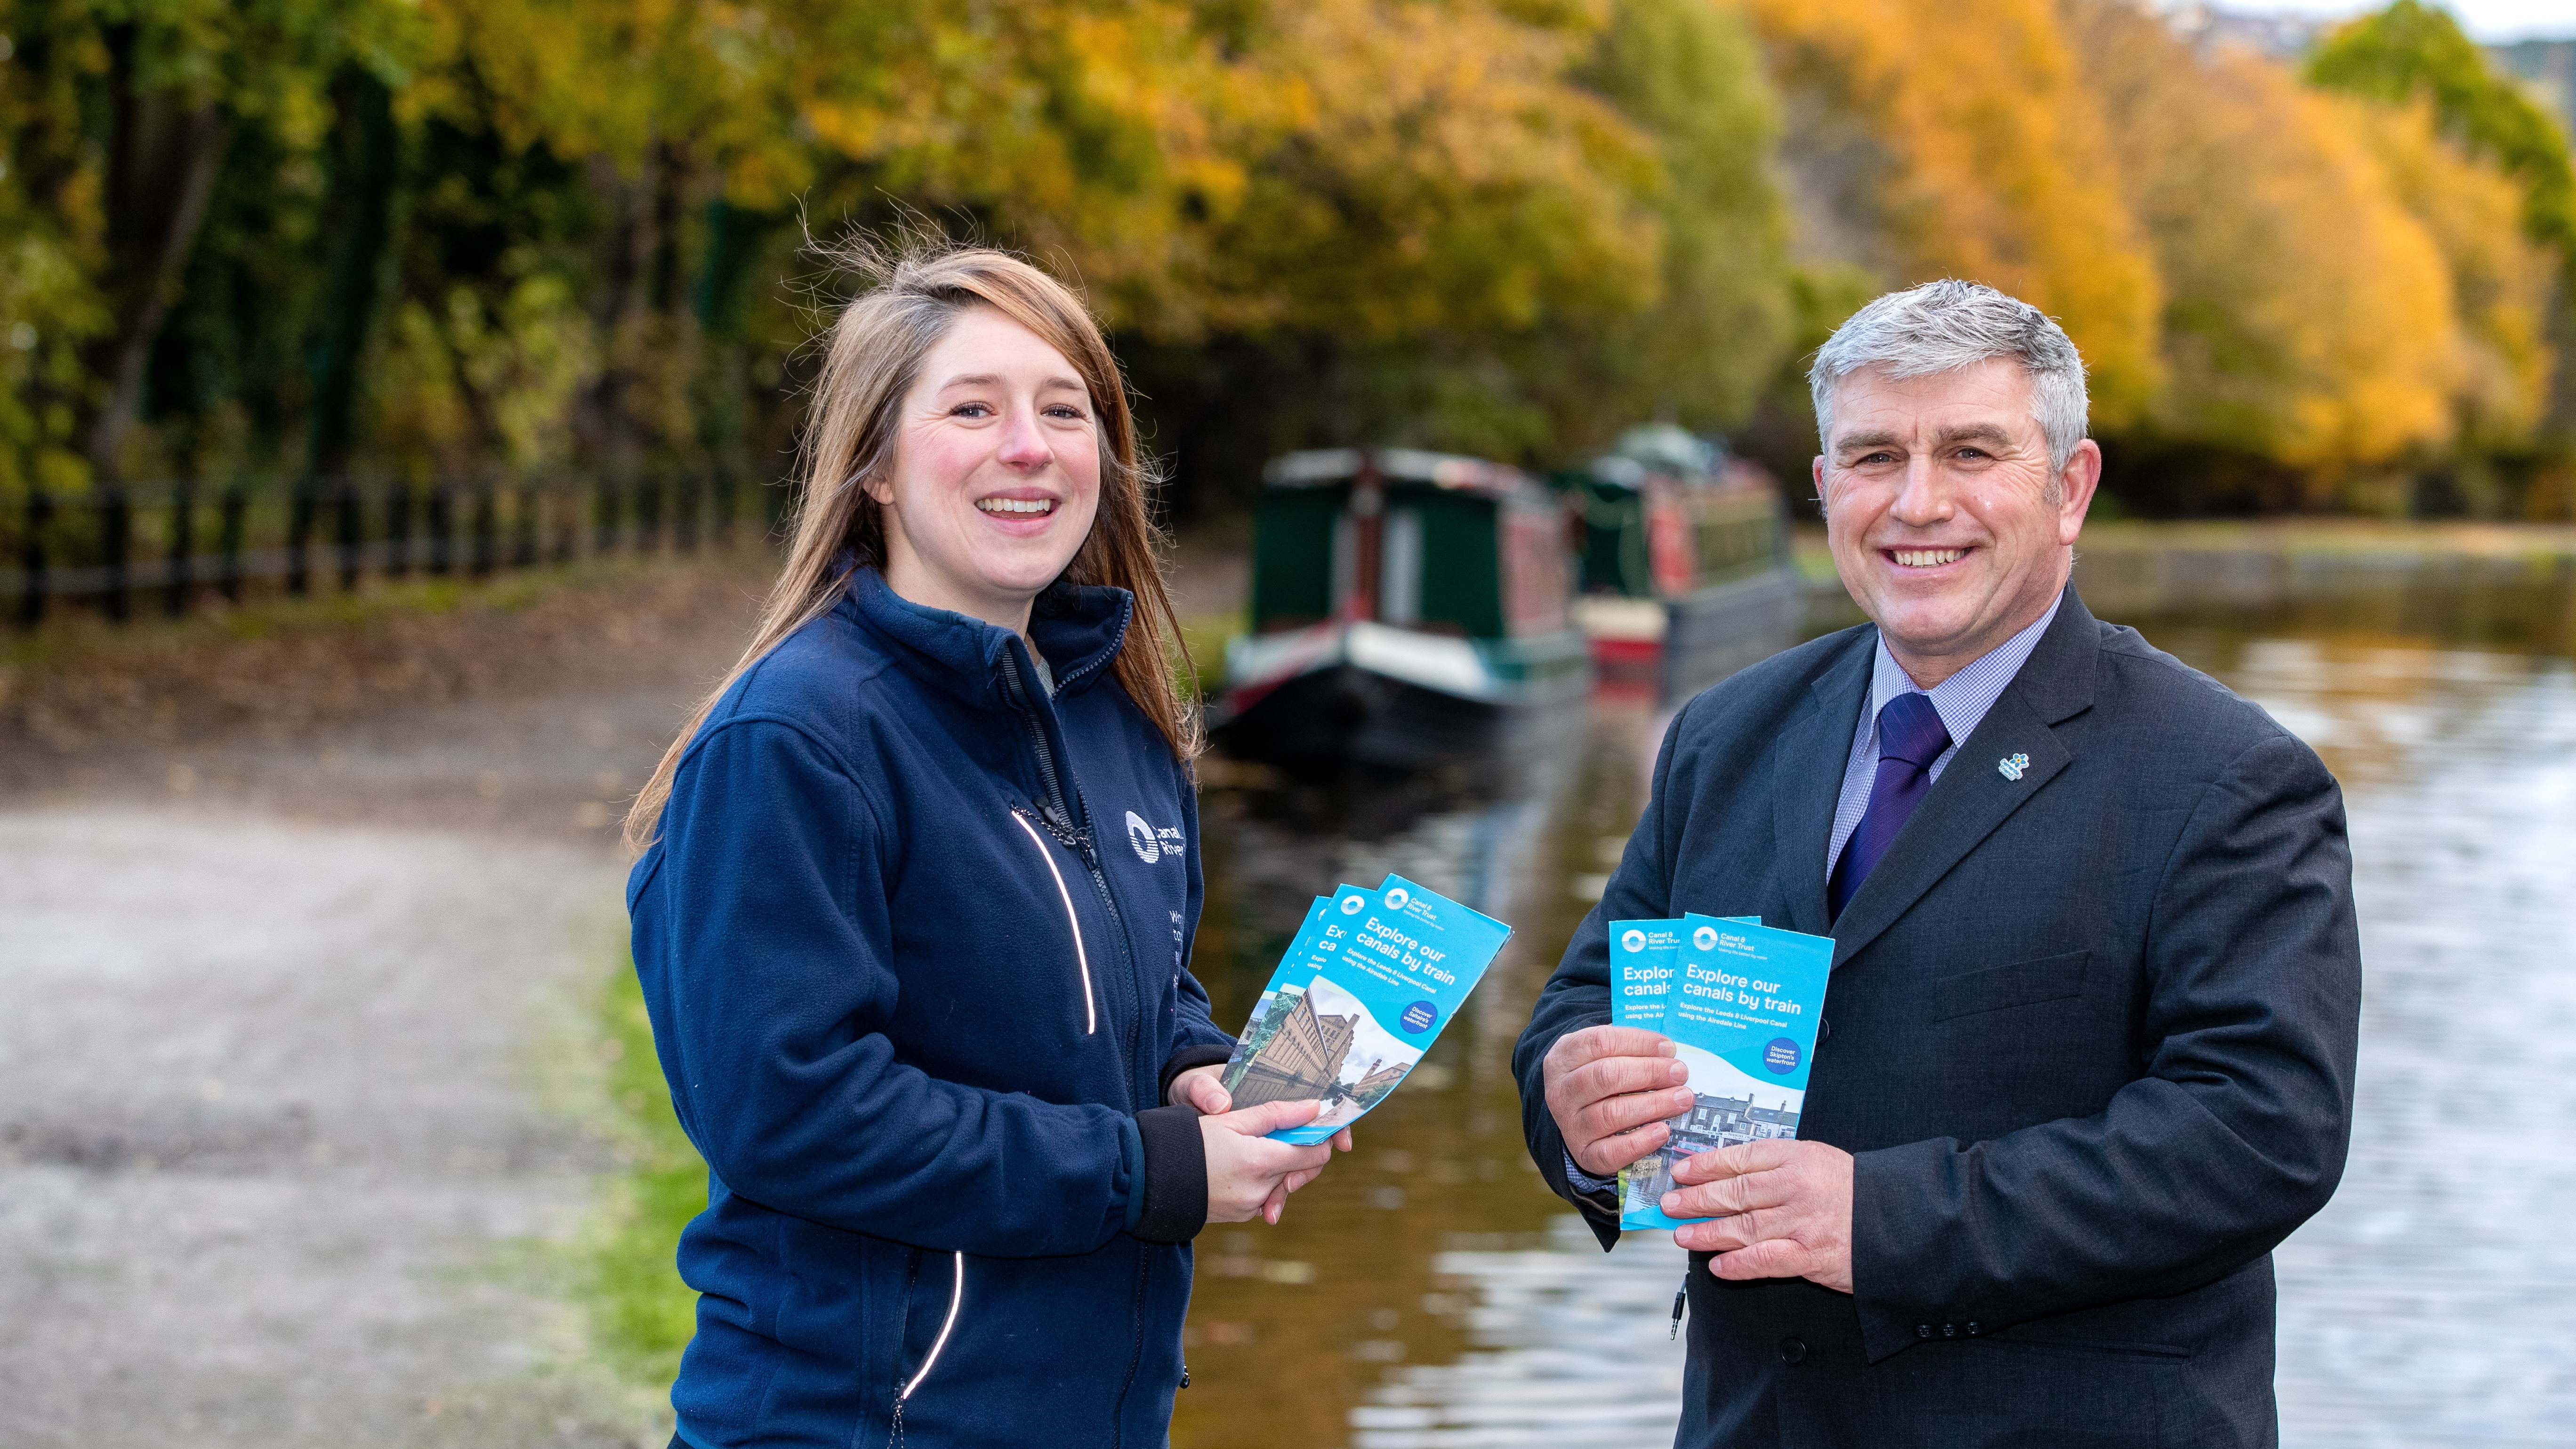 Northern teams up with Canal Charity 1-2